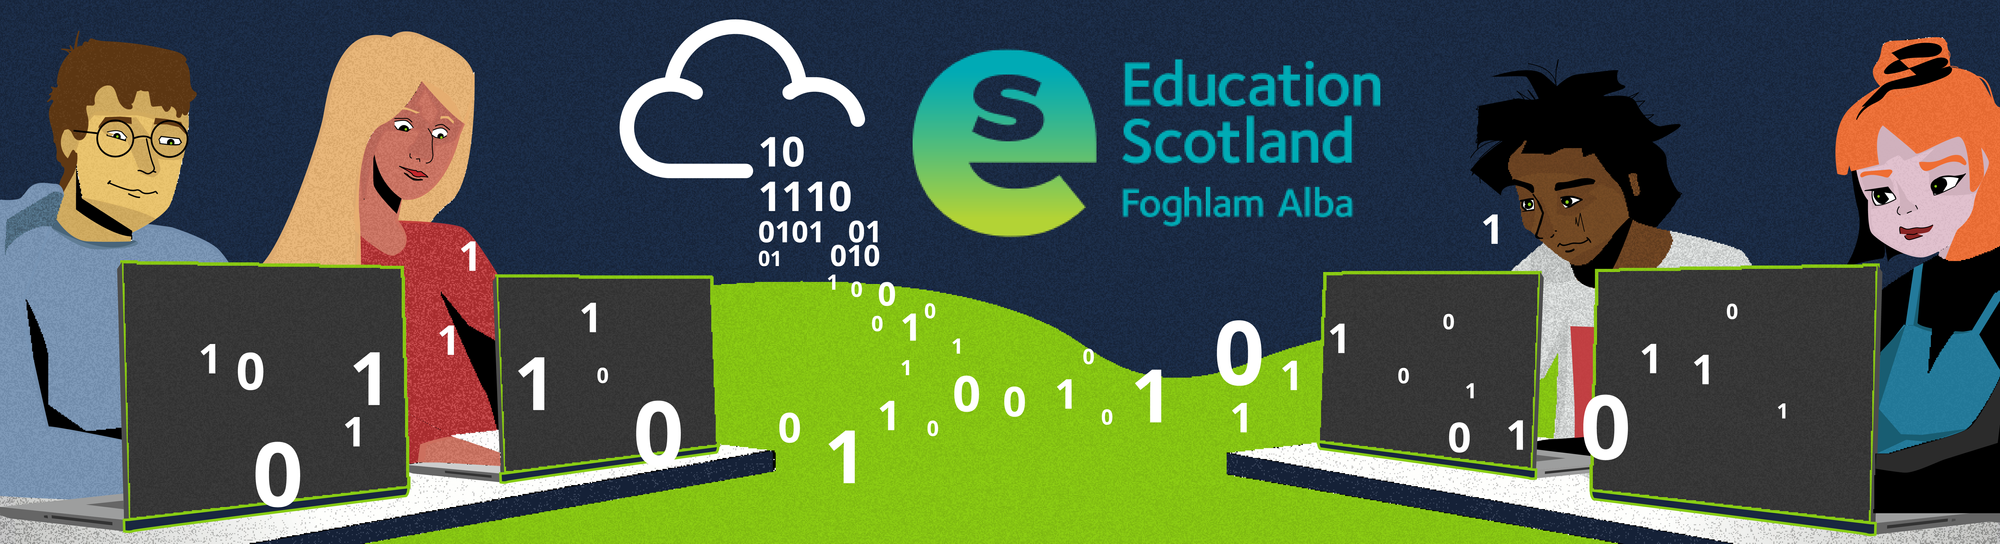 Education Scotland x TryHackMe: Creating a Skilled, Cyber Aware Generation